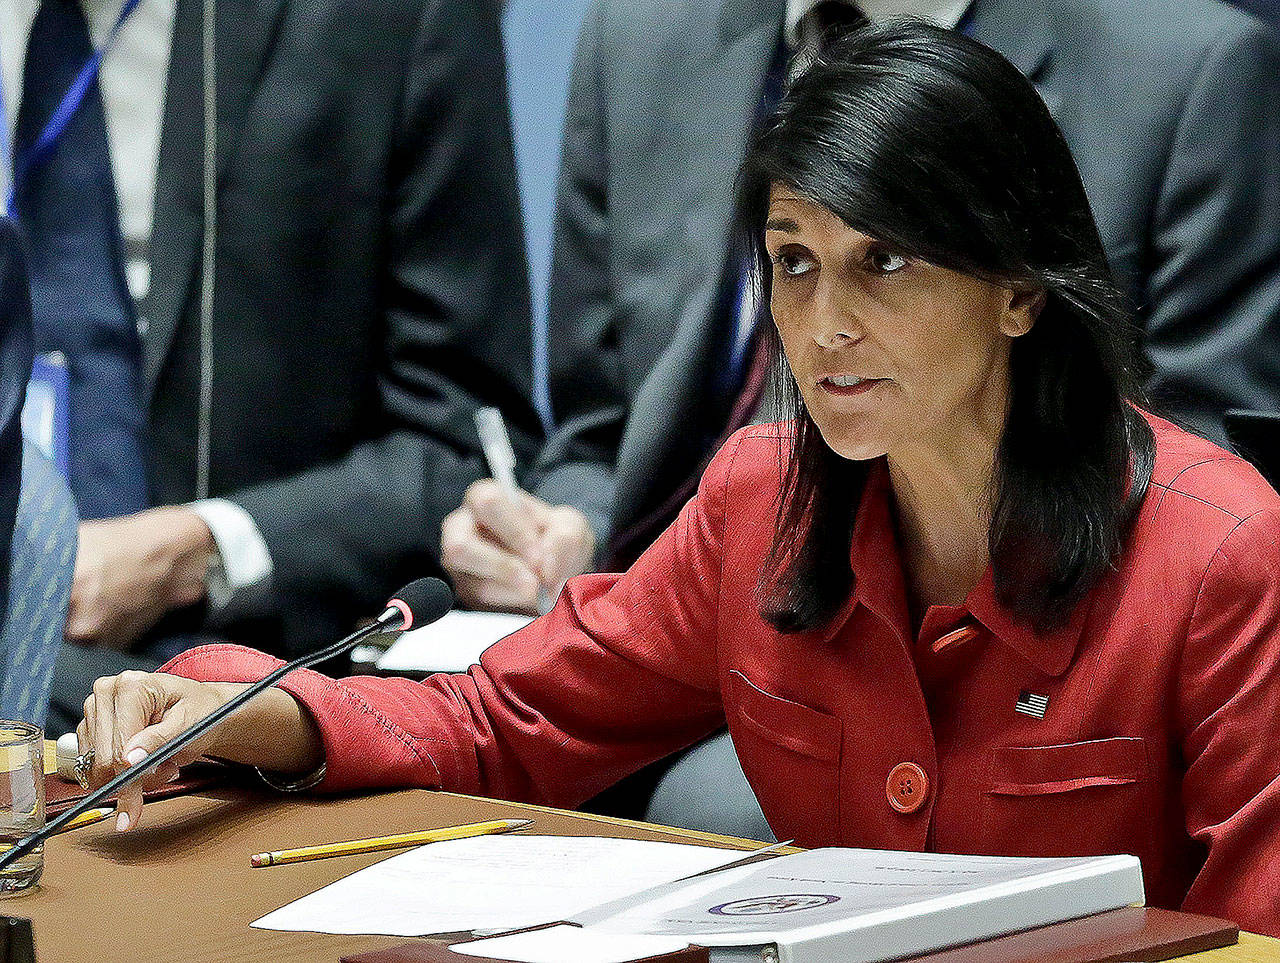 United States U.N. Ambassador Nikki Haley during United Nations Security Council meeting on North Korea’s latest launch of an intercontinental ballistic missile, at U.N. headquarters in New York. (AP Photo/Bebeto Matthews)